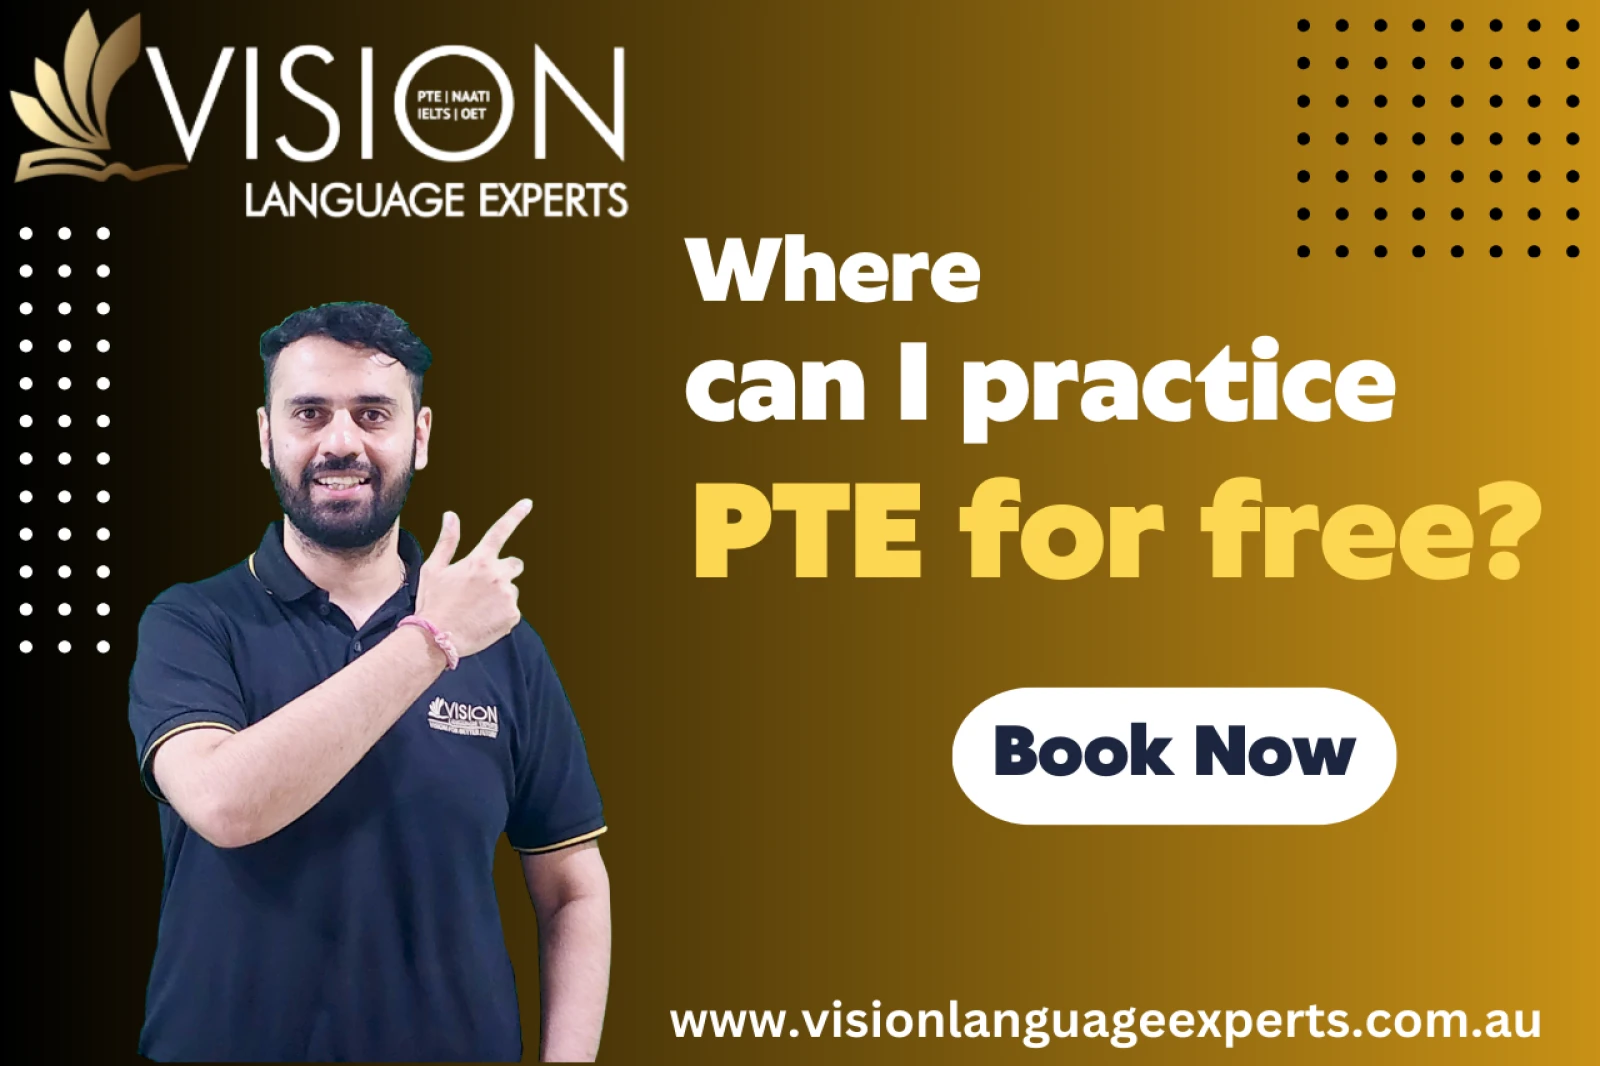 Exploring Free PTE Practice Options at Vision Language Experts